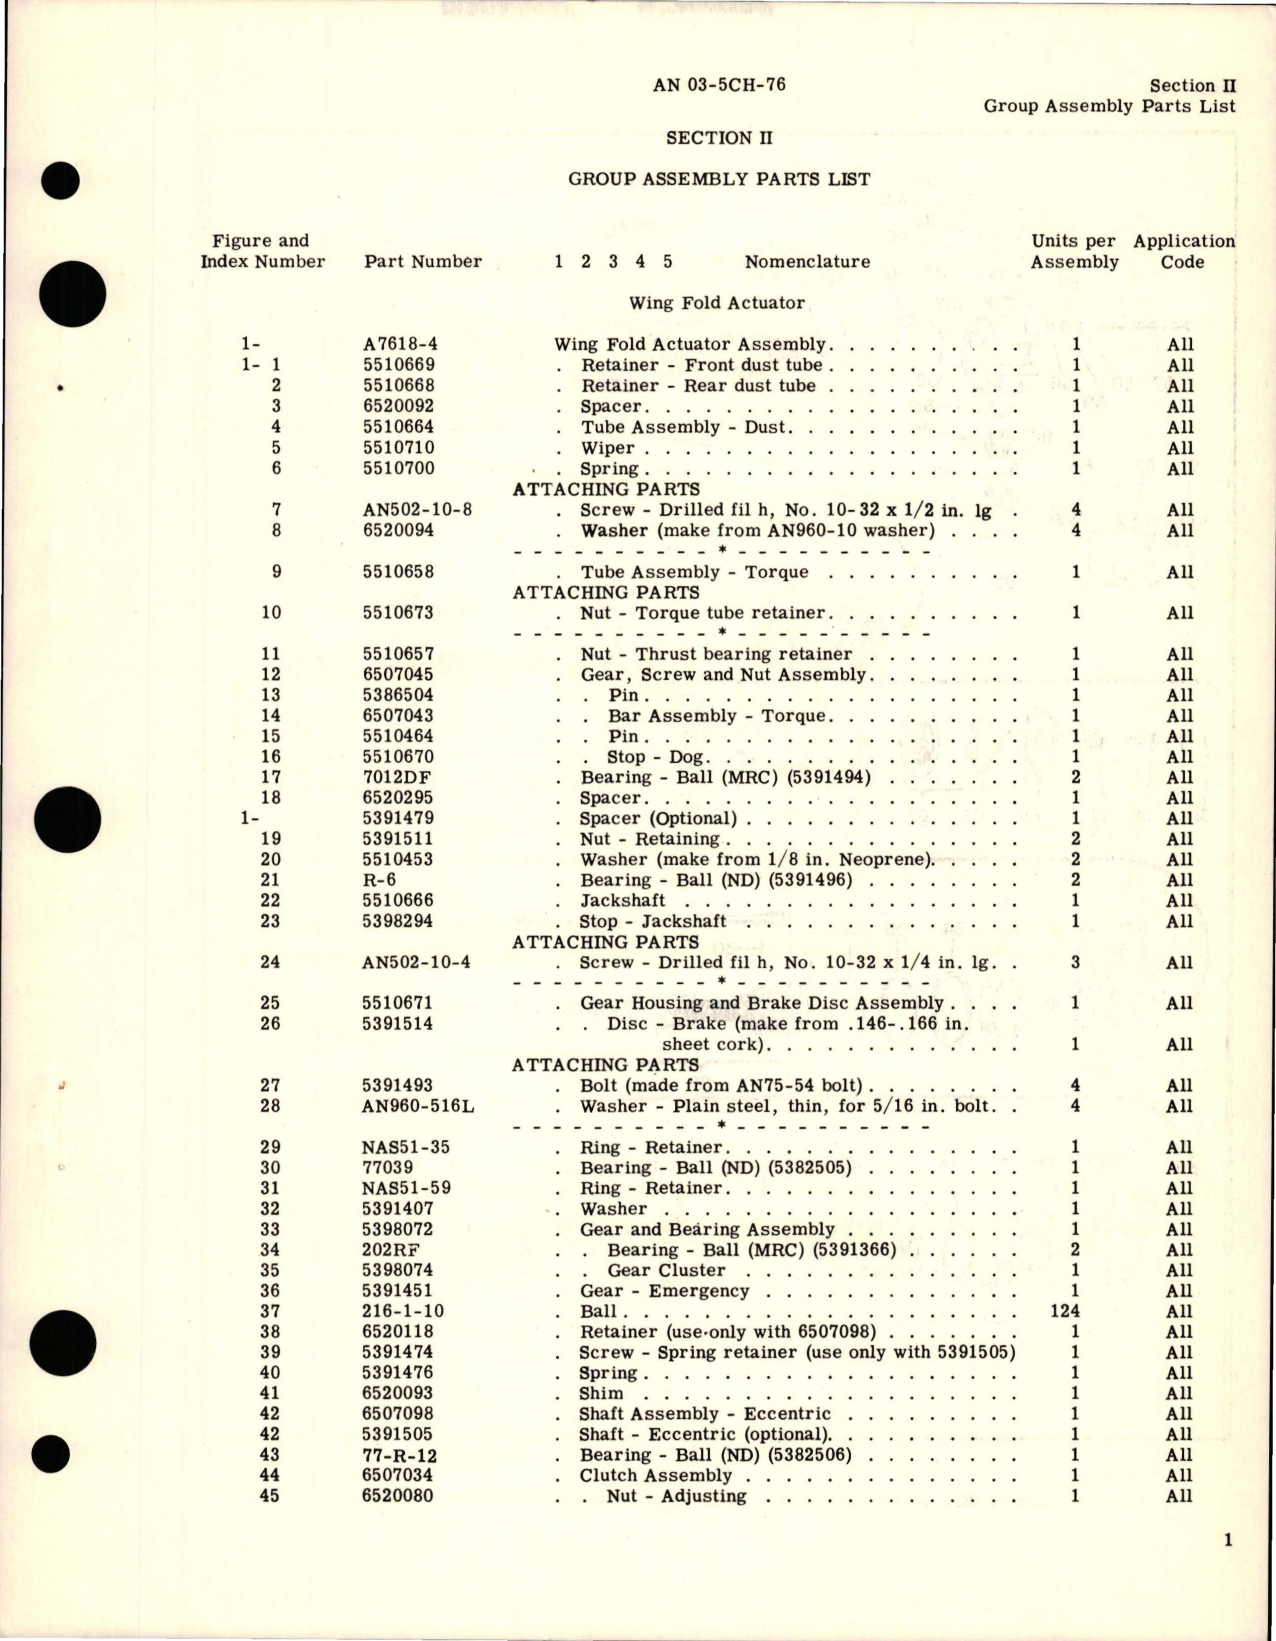 Sample page 5 from AirCorps Library document: Parts Catalog for Actuators